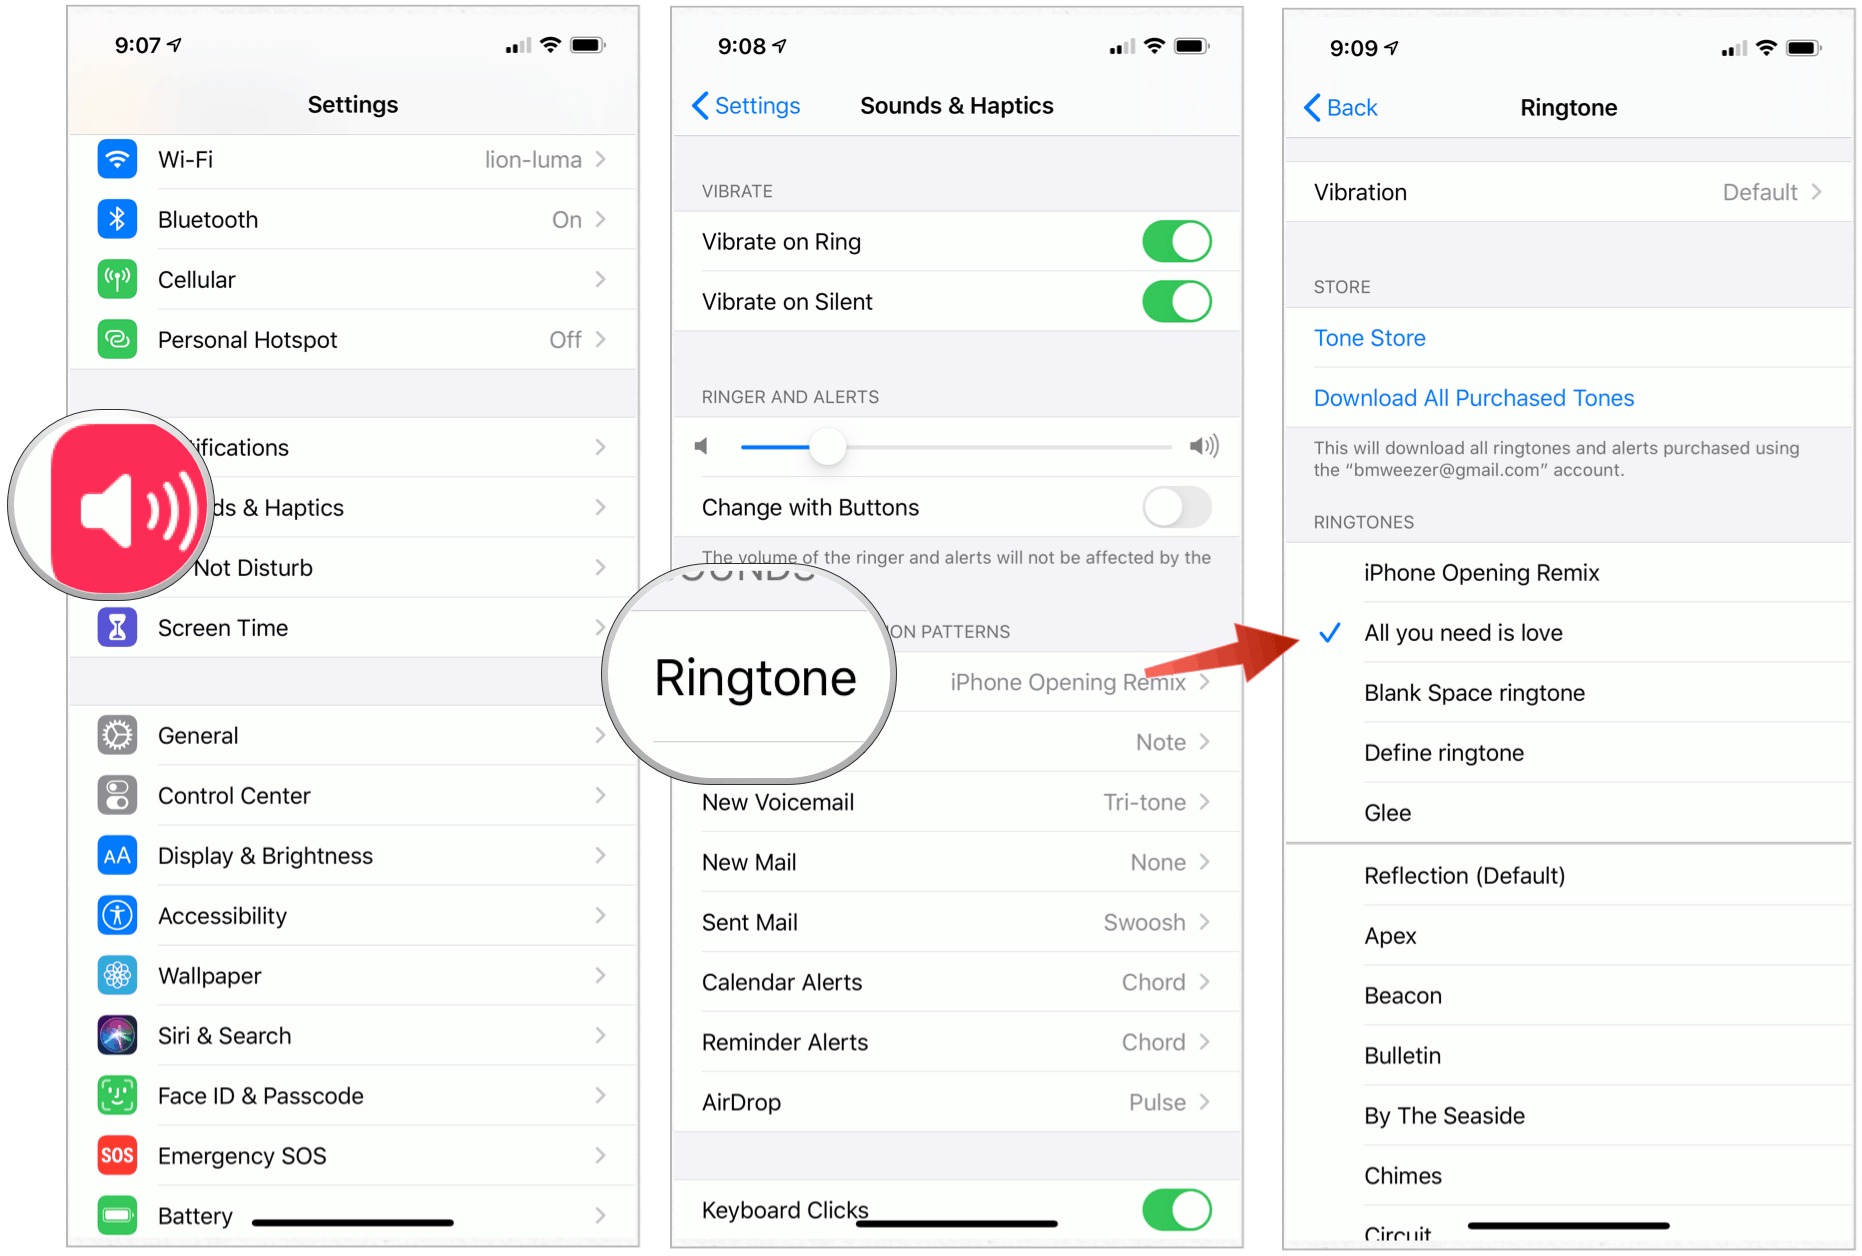 How To Buy Ringtones On The IPhone